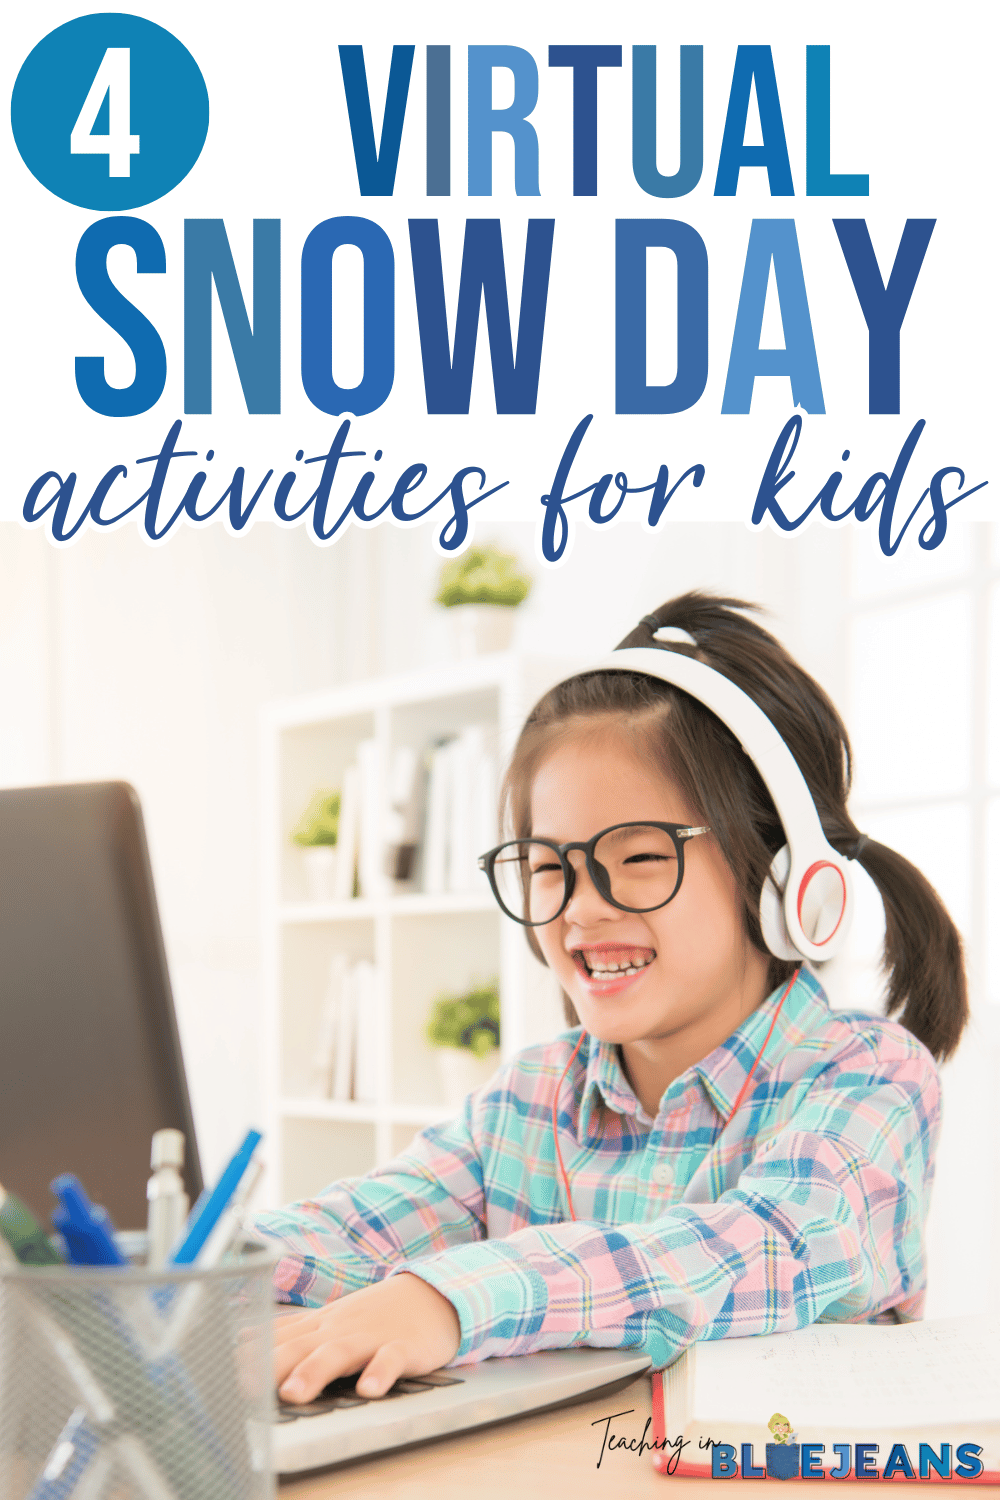 The next time you have a virtual learning day due to snow or bad weather, rest easy with these activities on your lesson plans.